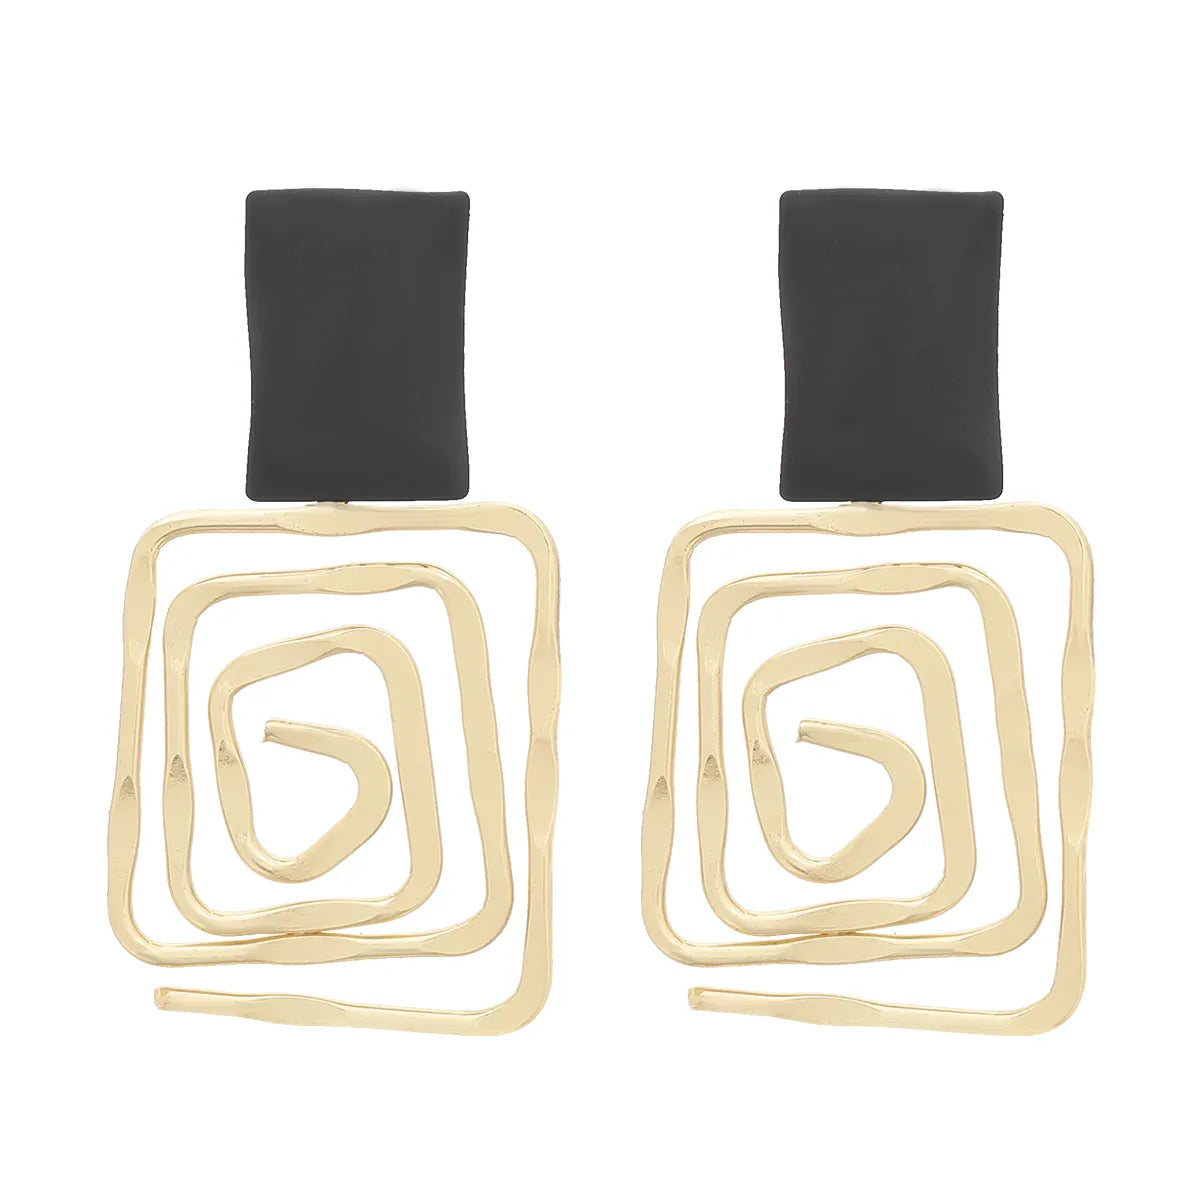 Black and Gold Squared earrings